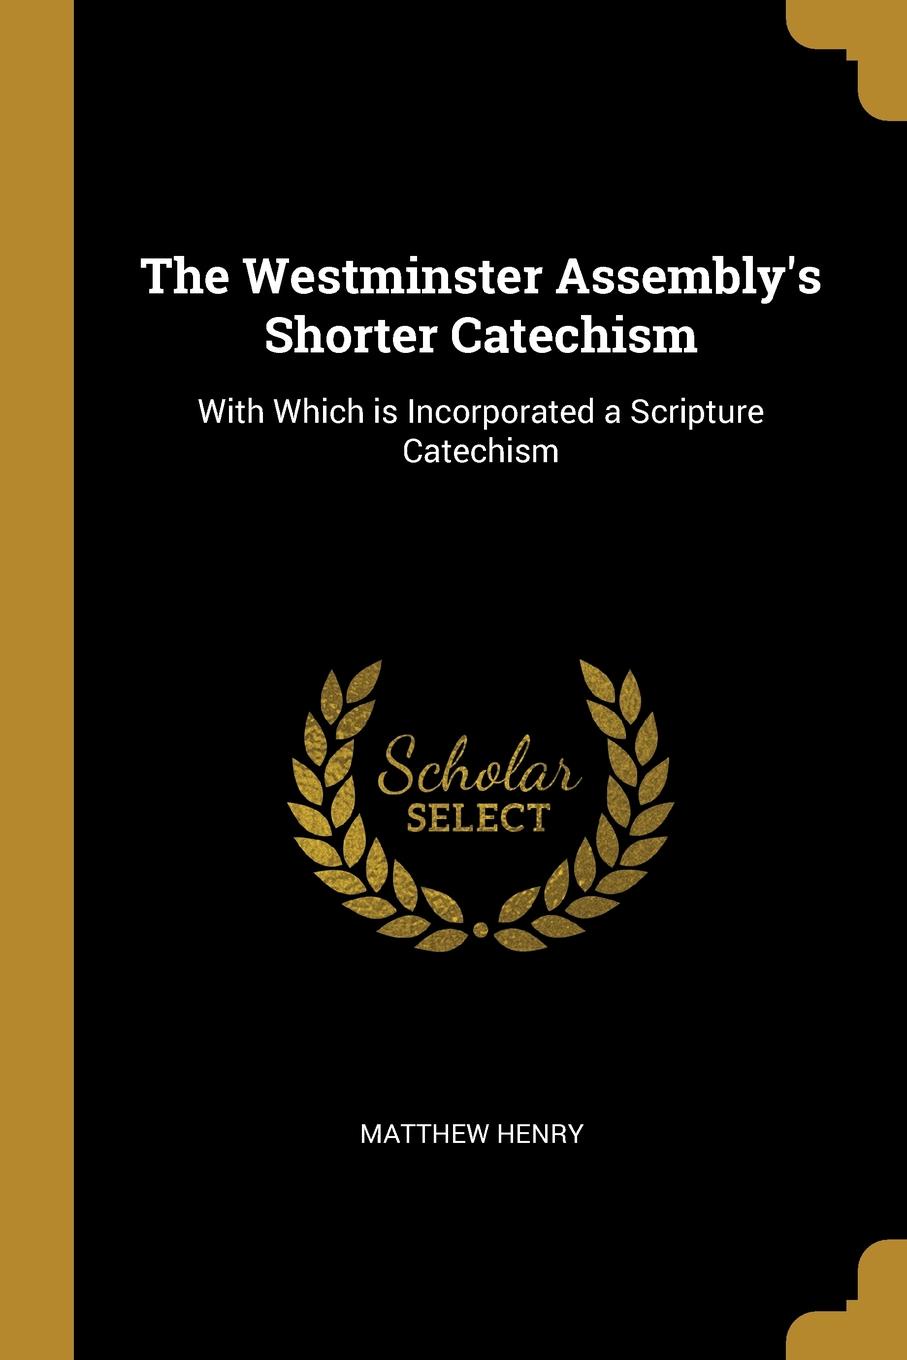 The Westminster Assembly.s Shorter Catechism. With Which is Incorporated a Scripture Catechism